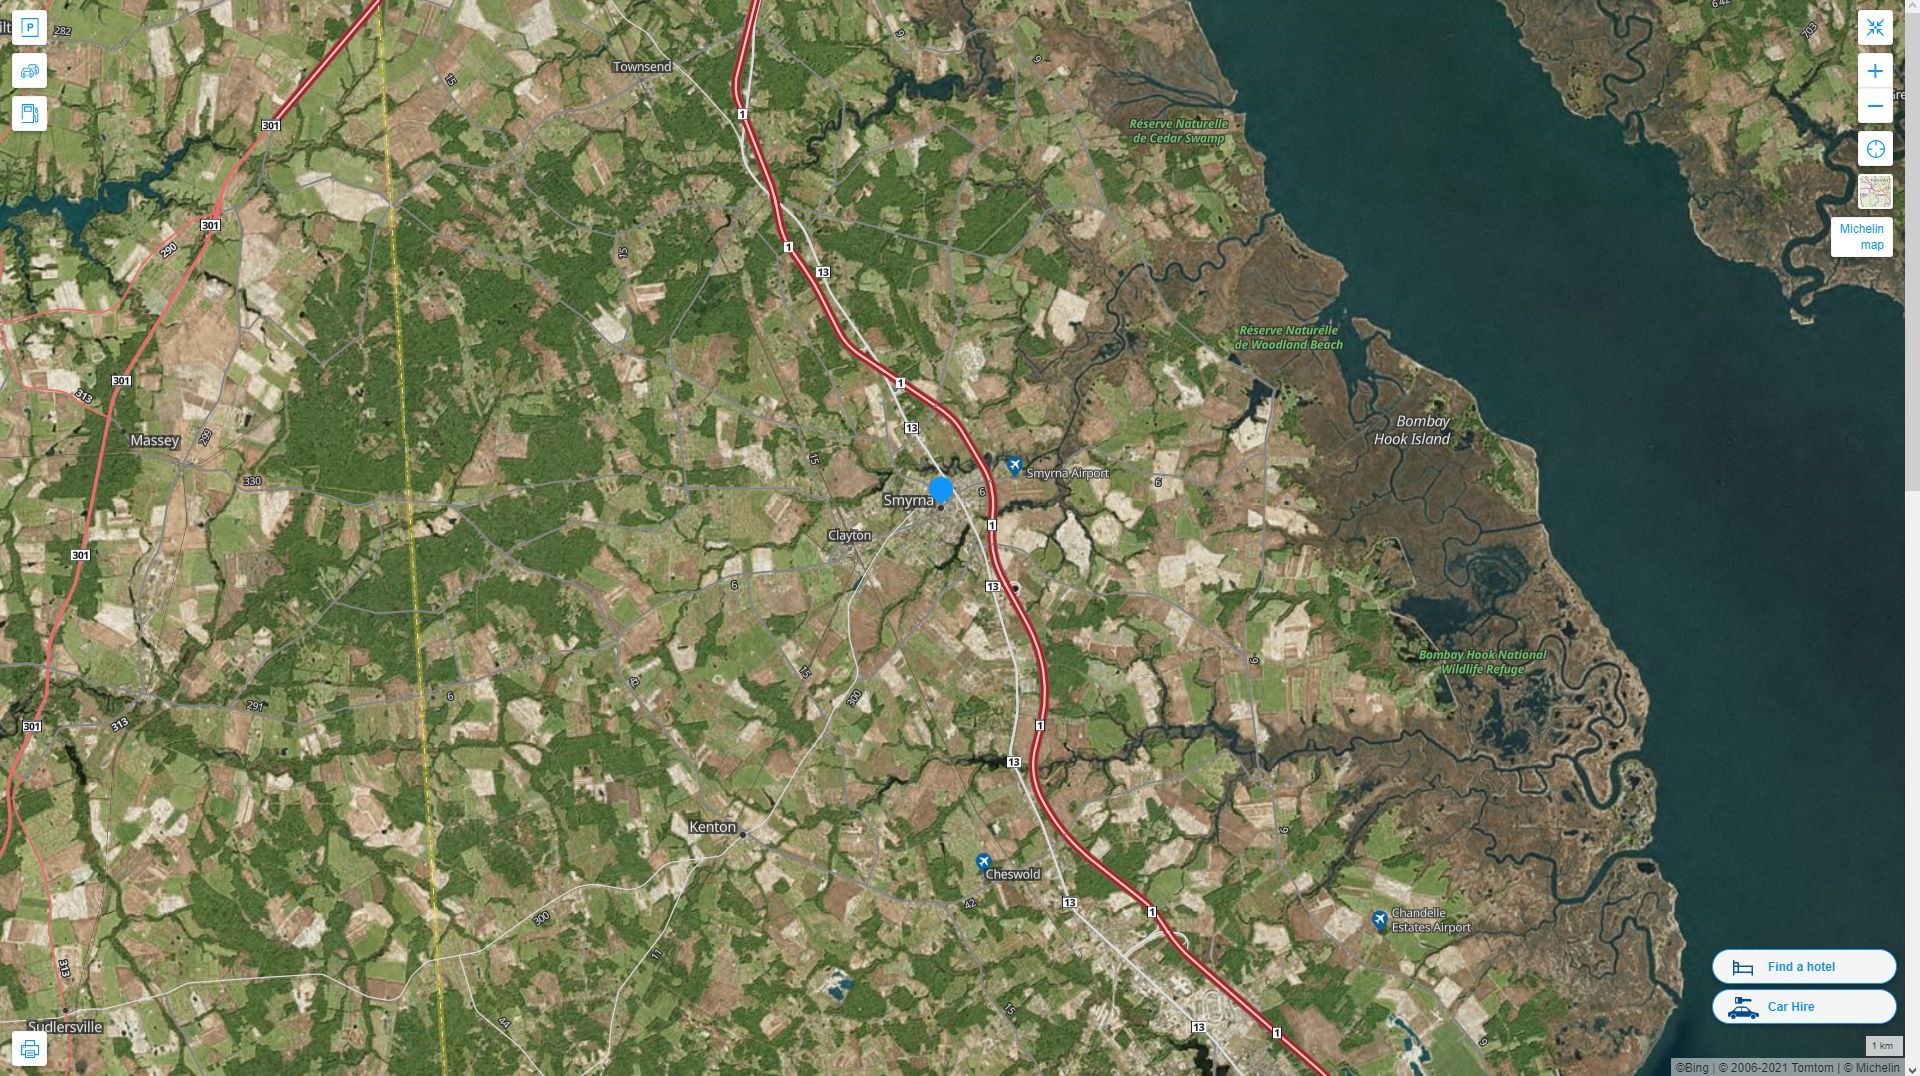 Smyrna Delaware Highway and Road Map with Satellite View